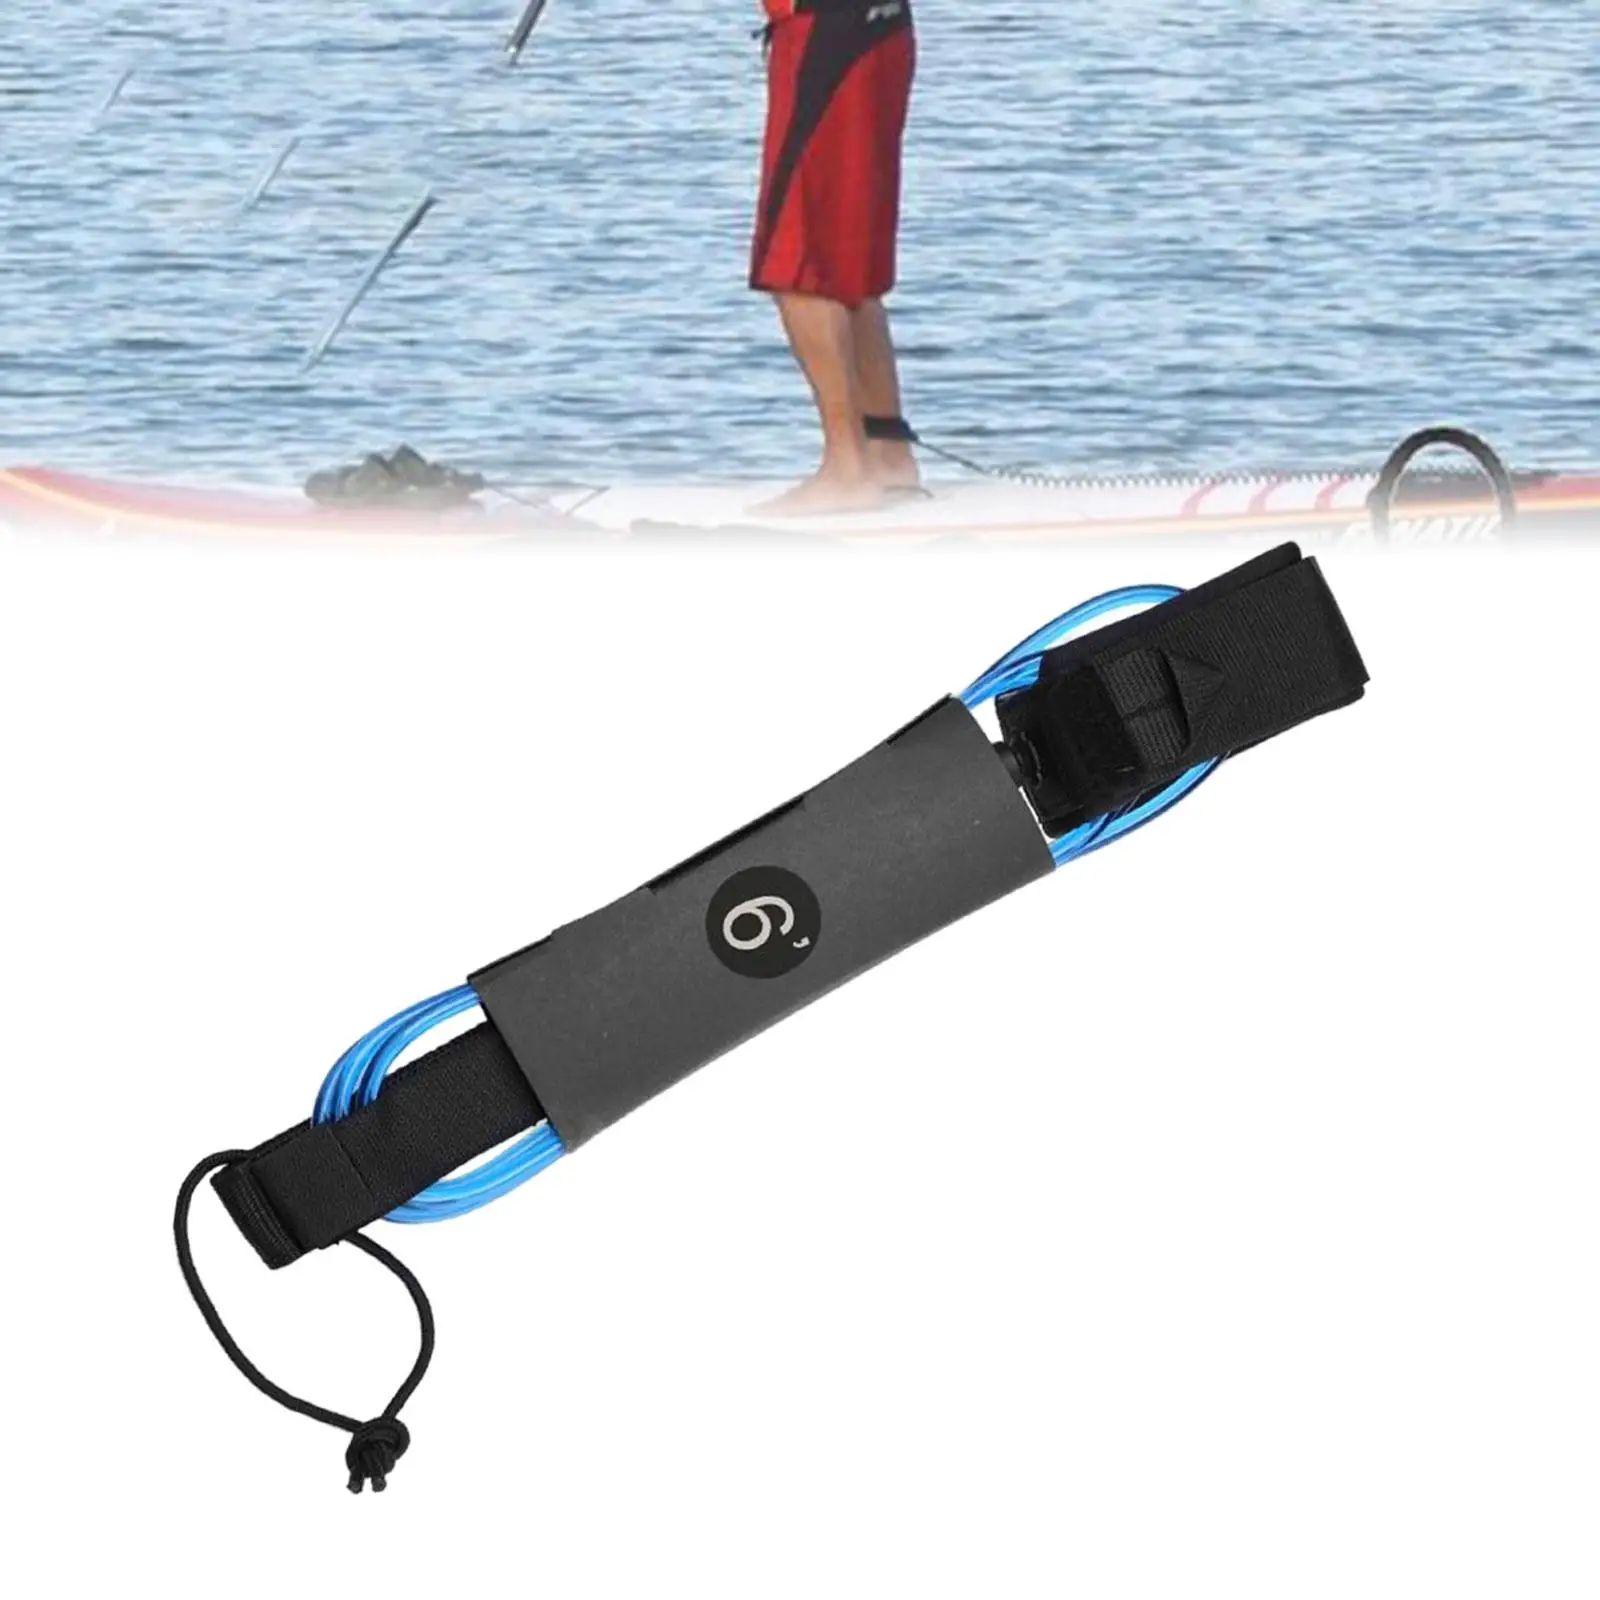 Surfing Leash Leg Rope 5mm Thick Adjustable Elastic Paddle Board